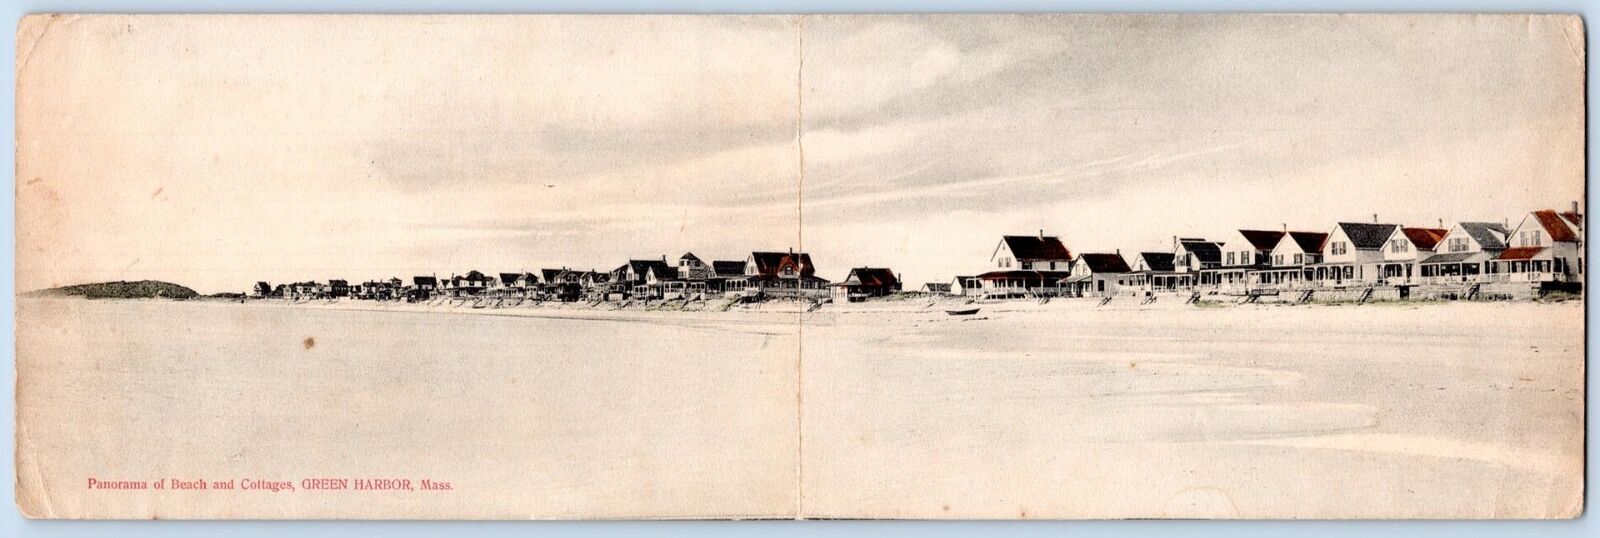 Pre-1907 GREEN HARBOR MA PANORAMA BEACH COTTAGES LONG FOLDING MAIL CARD POSTCARD